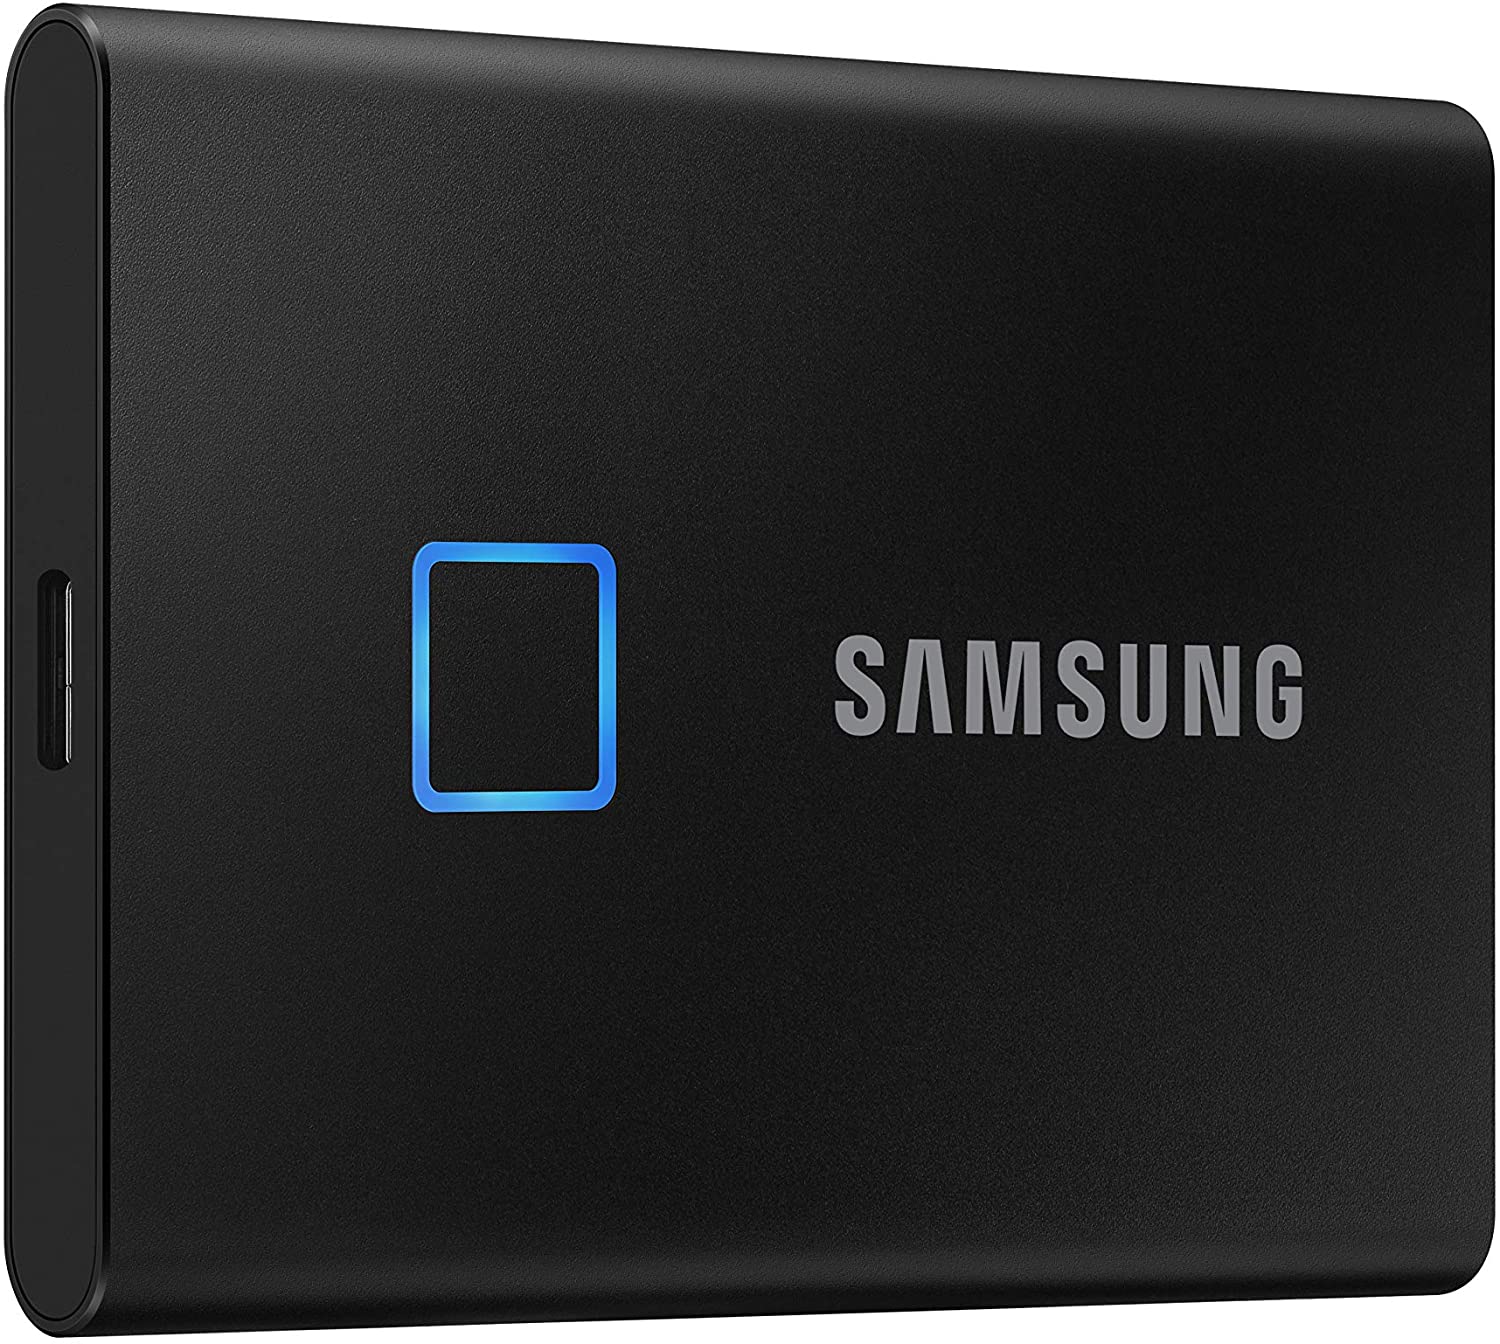 1TB Samsung T7 Touch External USB 3.2 Gen 2 Portable SSD with Hardware Encryption $140 + Free Shipping